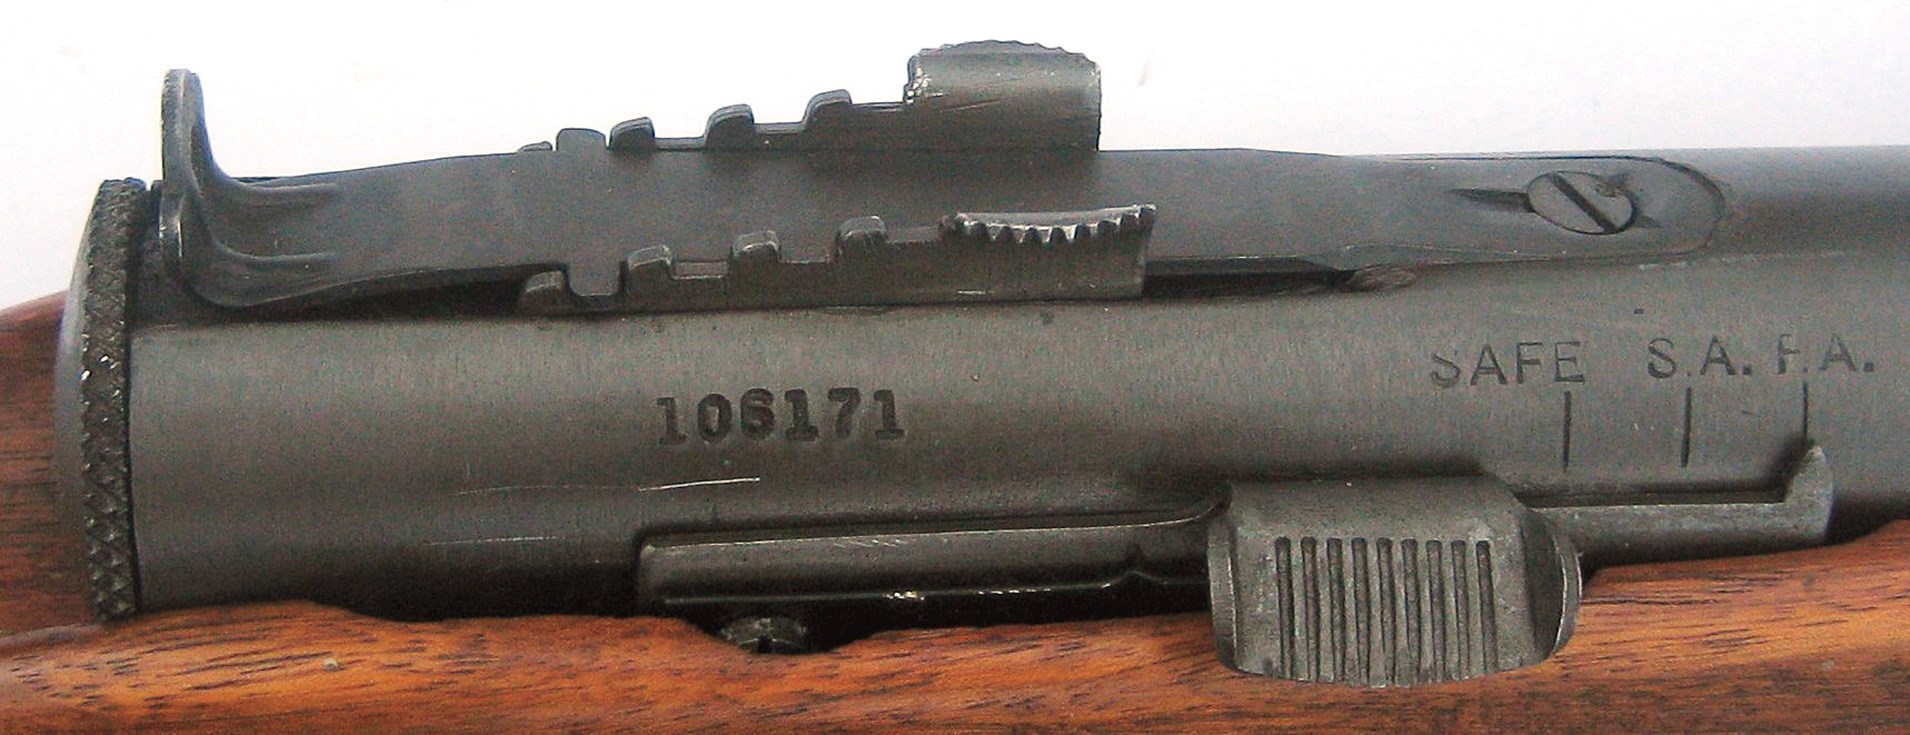 The Reising could fire from a closed bolt in full- or semi-automatic. The selector was on the receiver’s right.